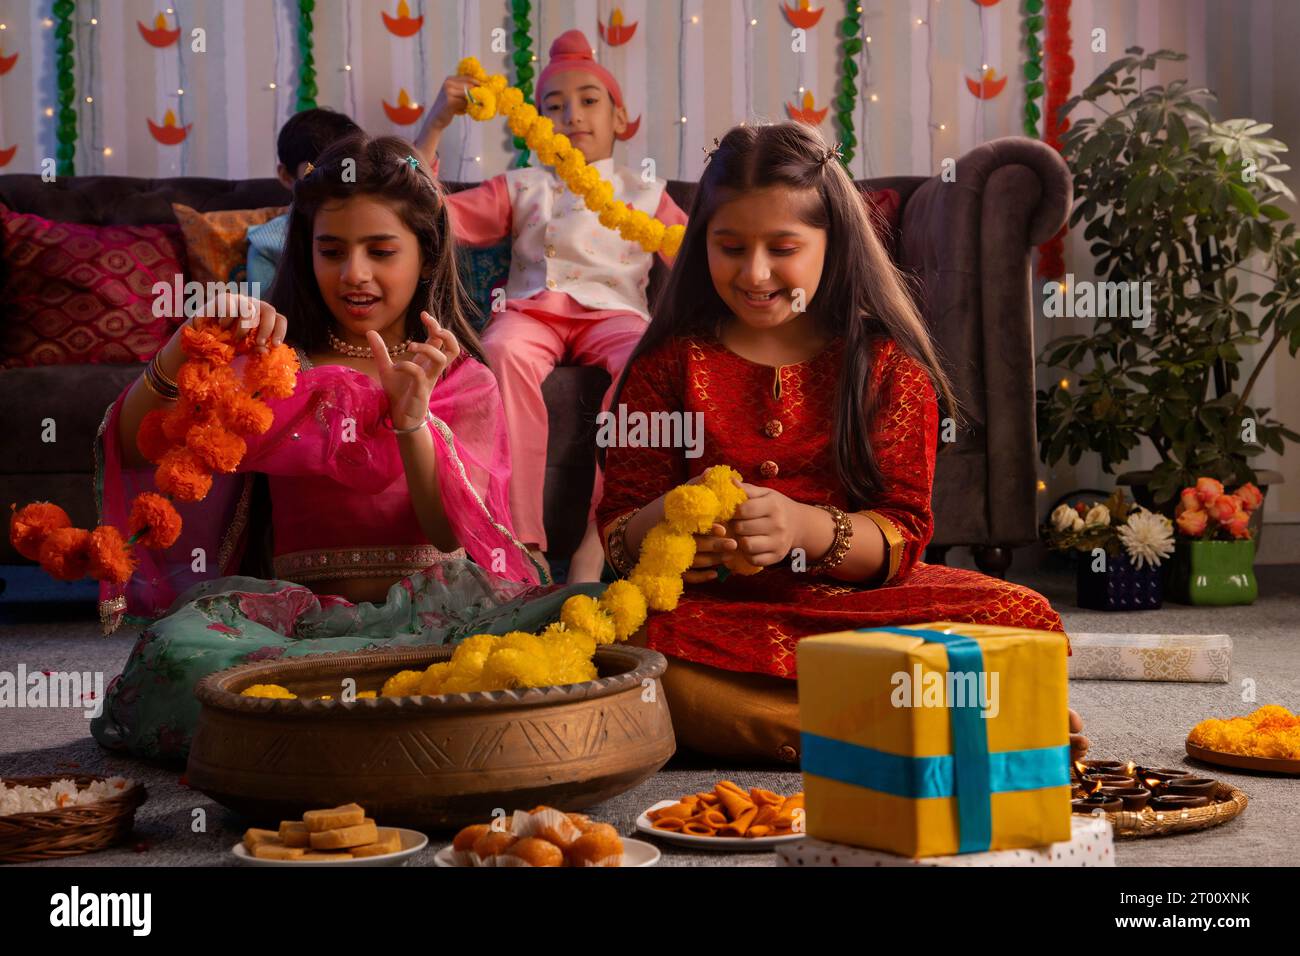 Group of children making garlands with flowers during Diwali celebration Stock Photo